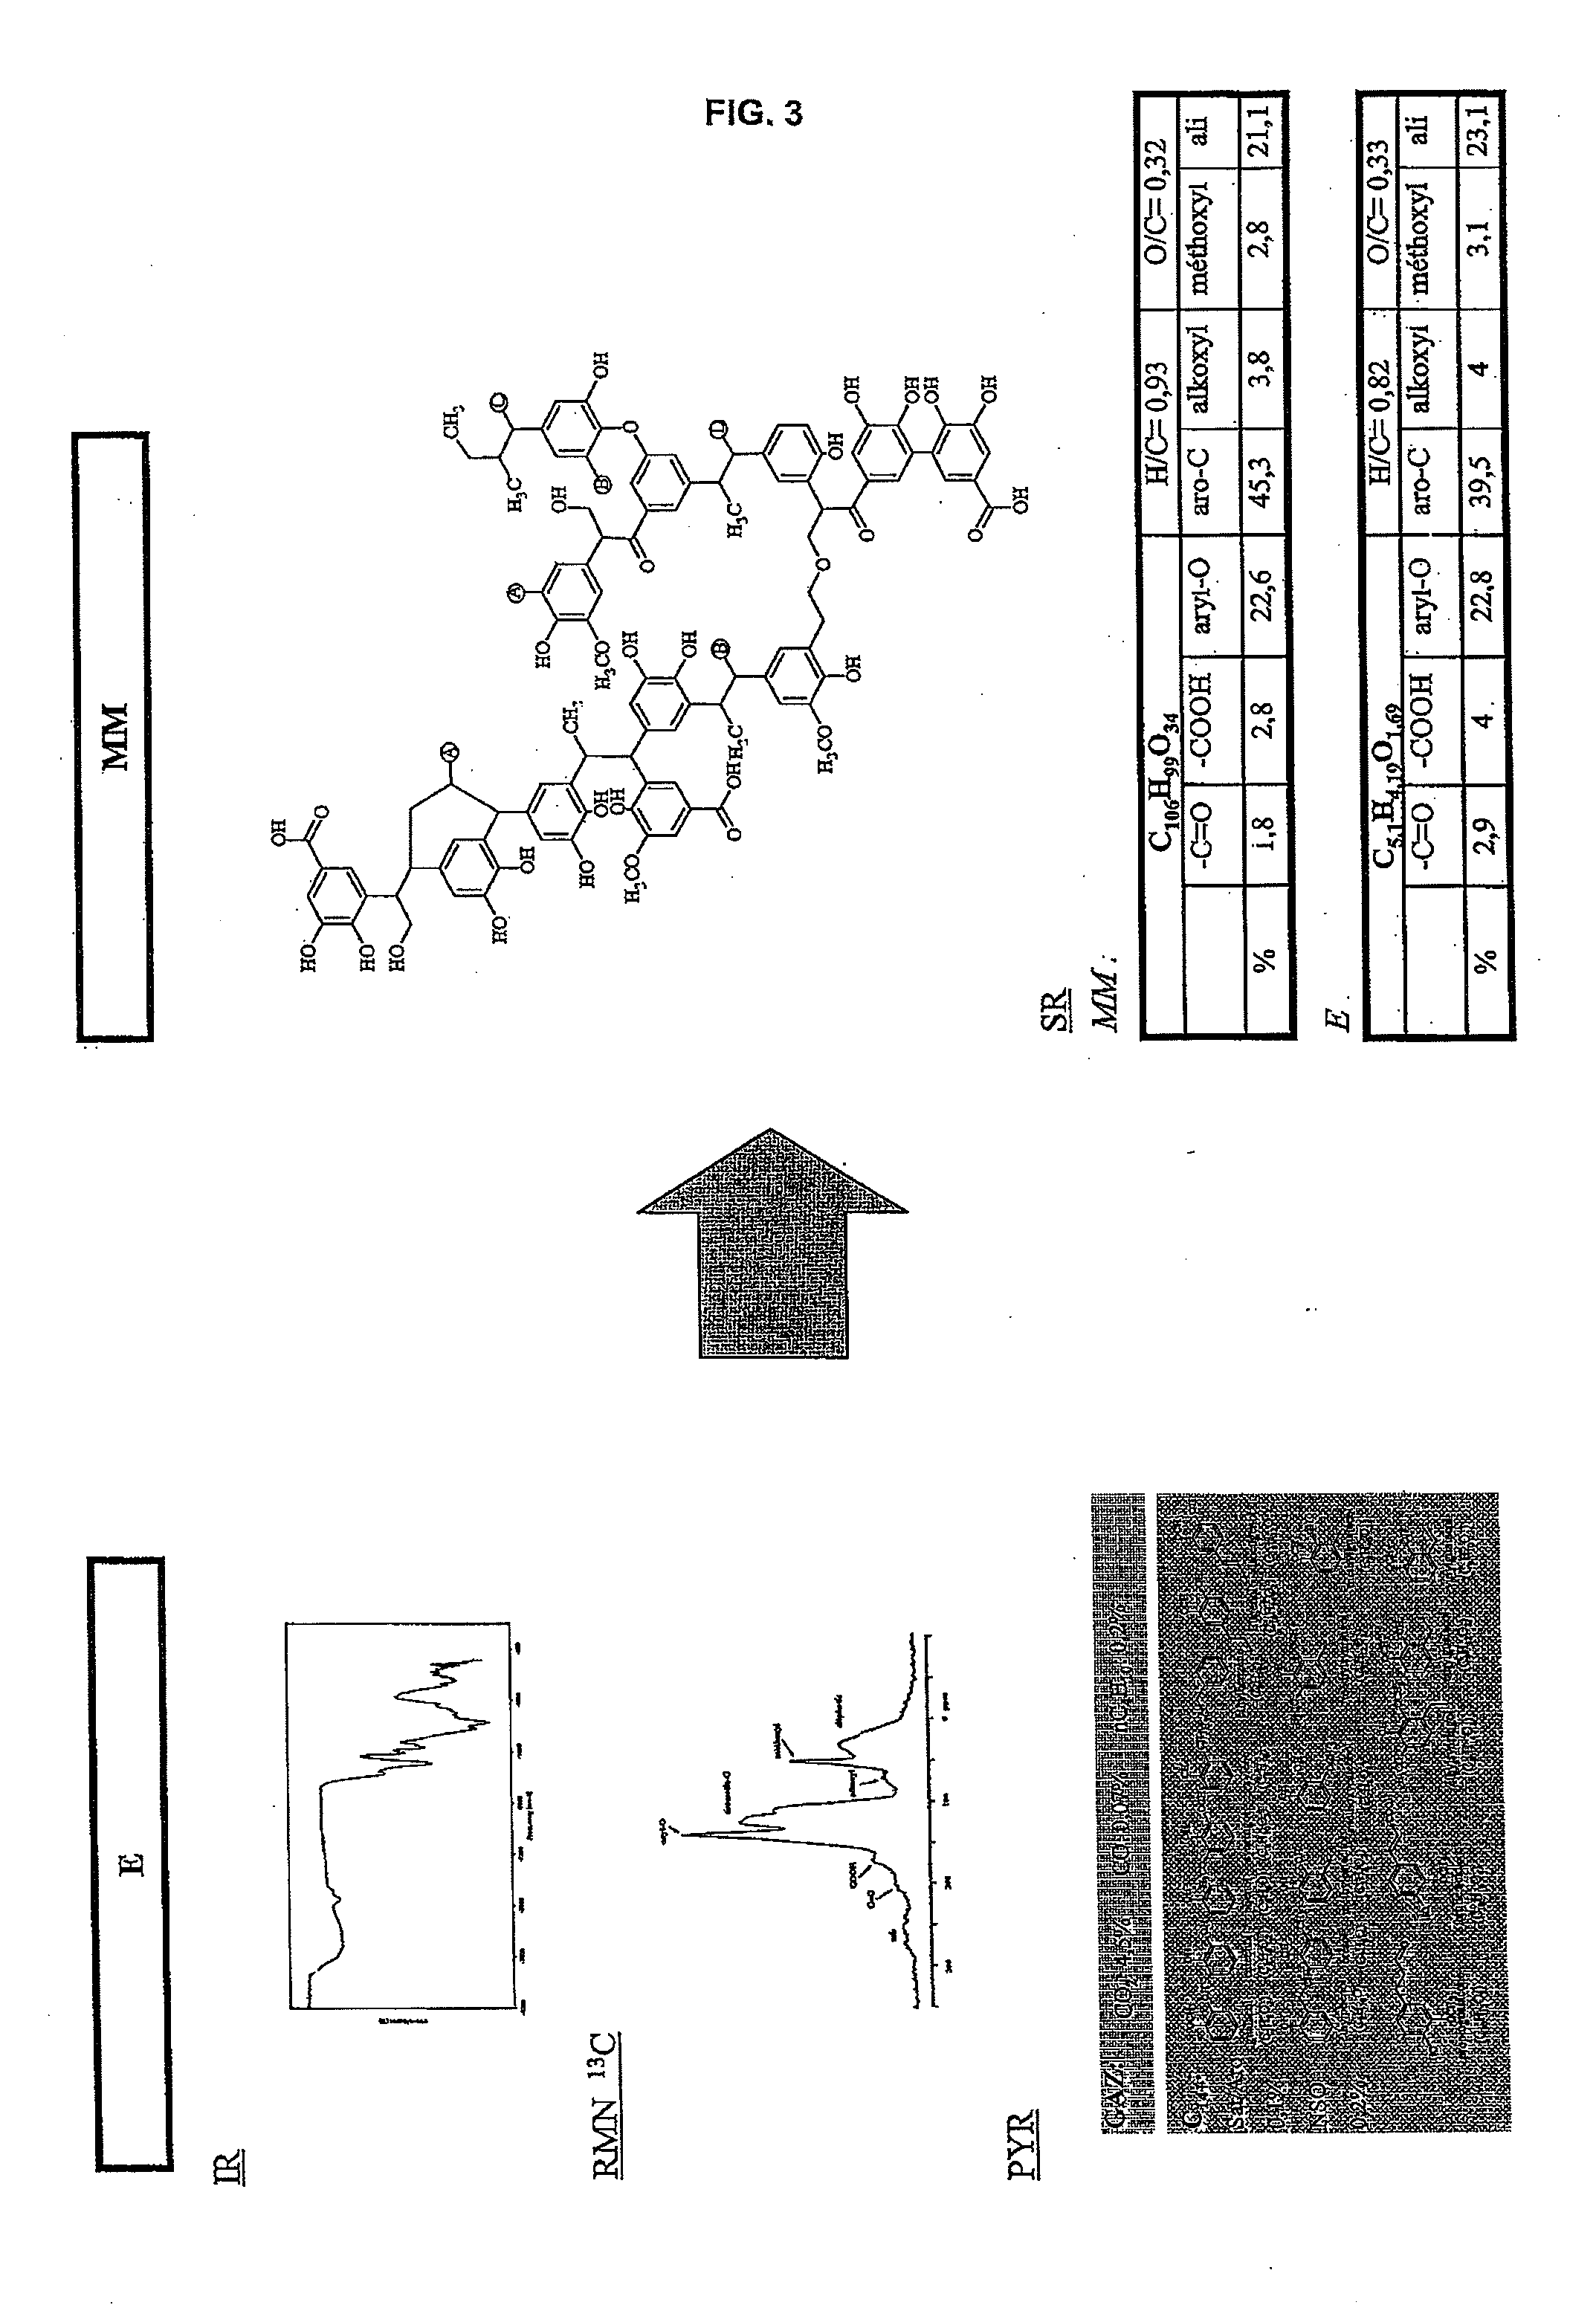 Method of quantifying hydrocarbon formation and retention in a mother rock